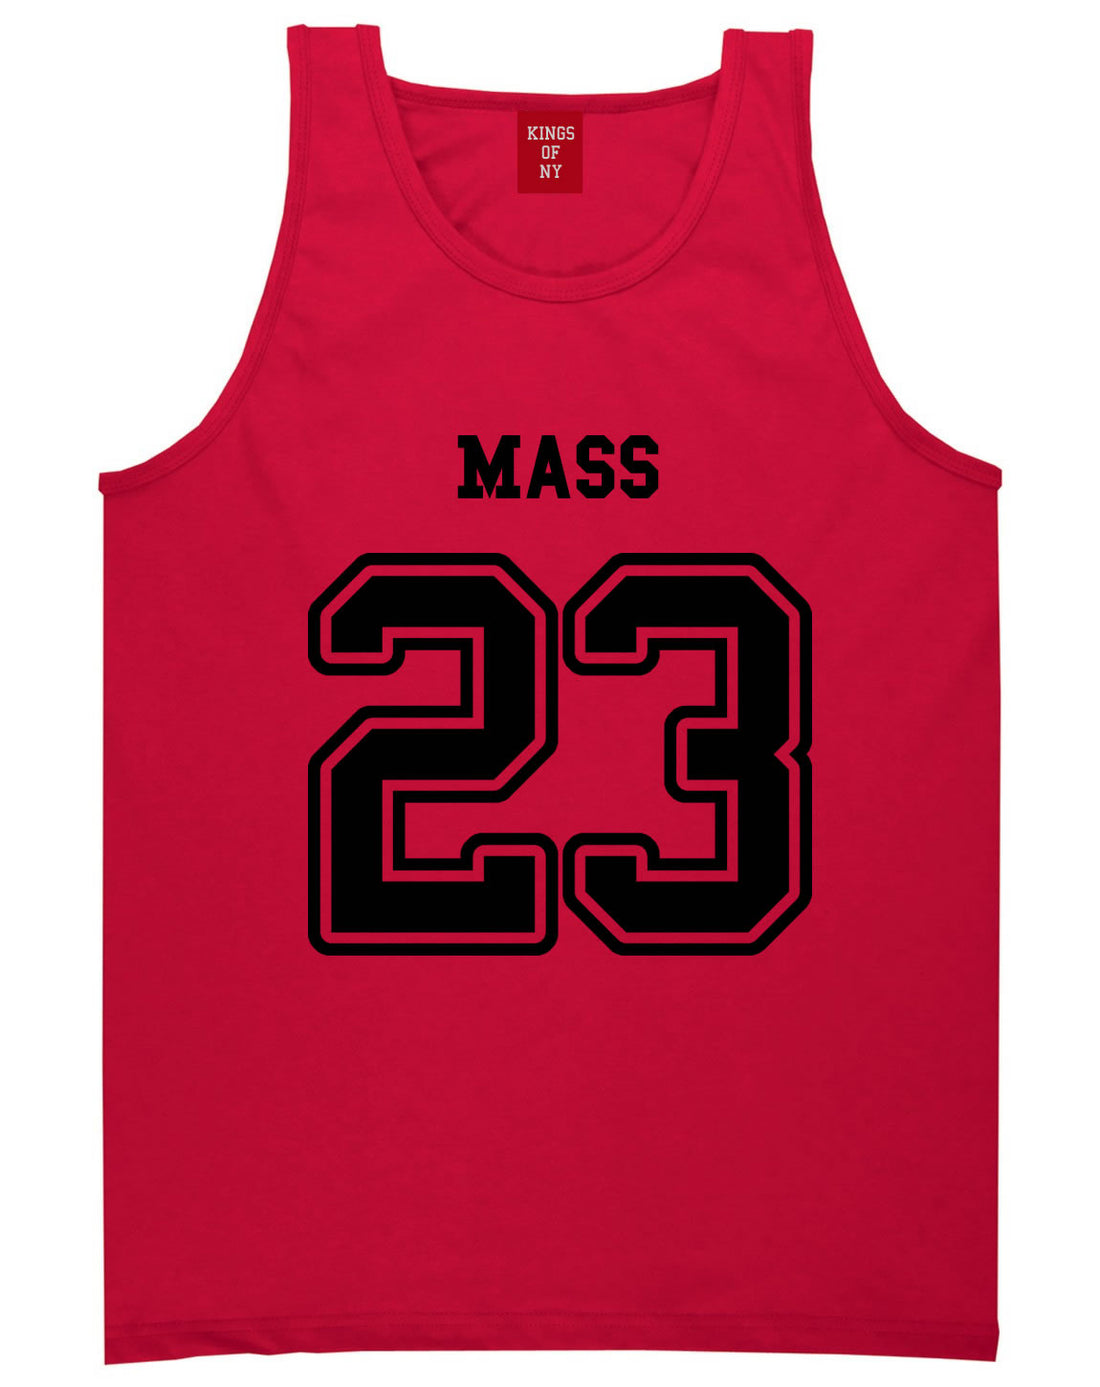 Sport Style Massachusetts 23 Team State Jersey Mens Tank Top By Kings Of NY